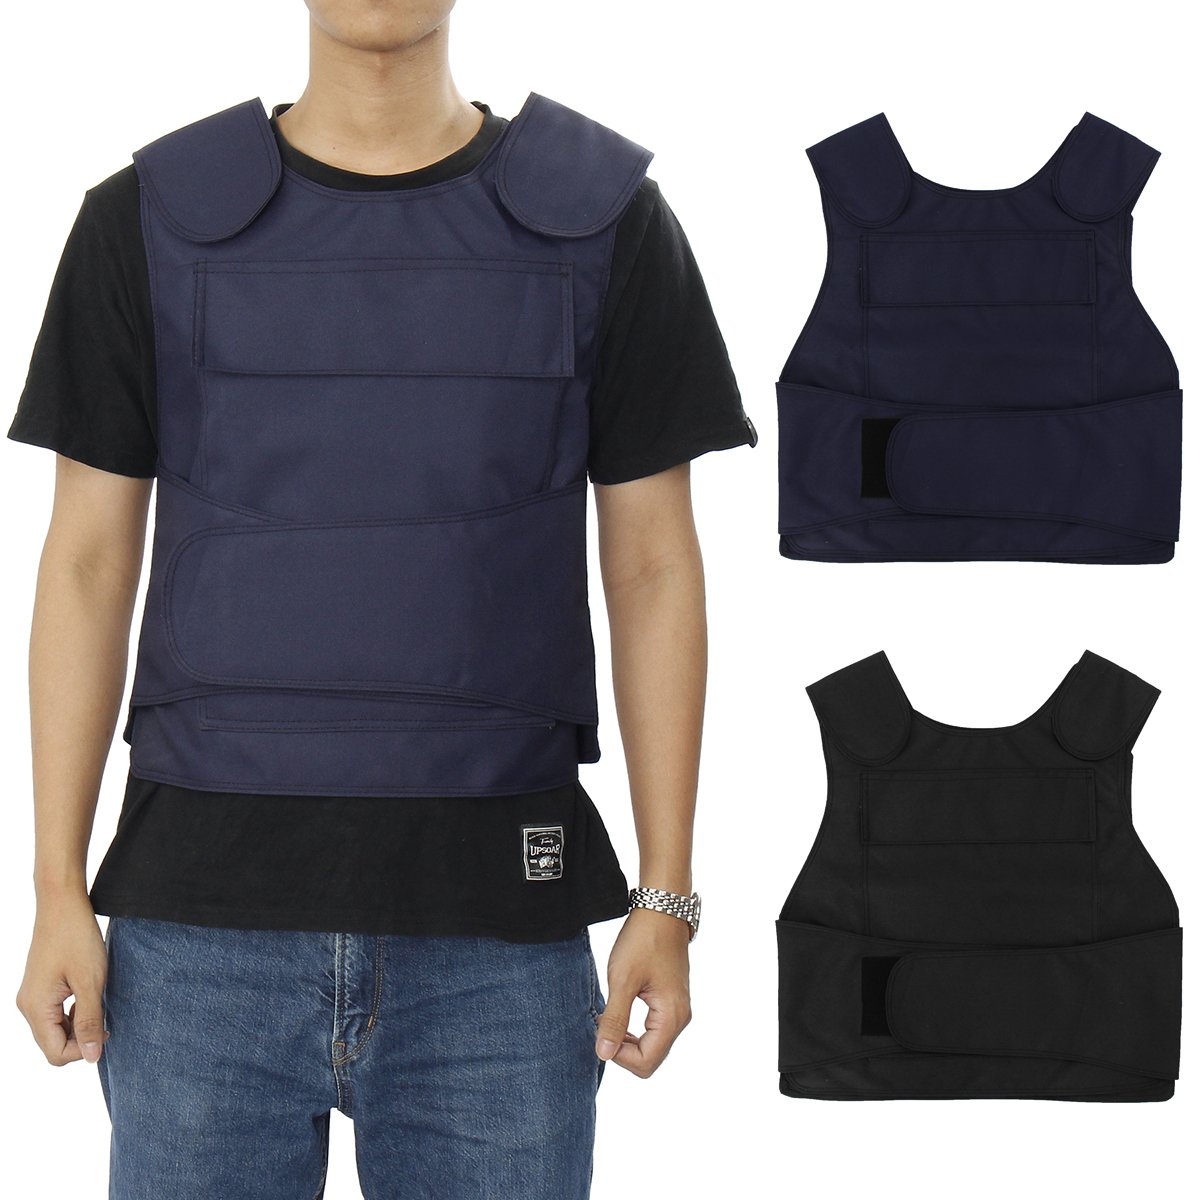 

Unisex Tactical Tank Tops 4 Protective Plates Security Carrier Training Military Jacket